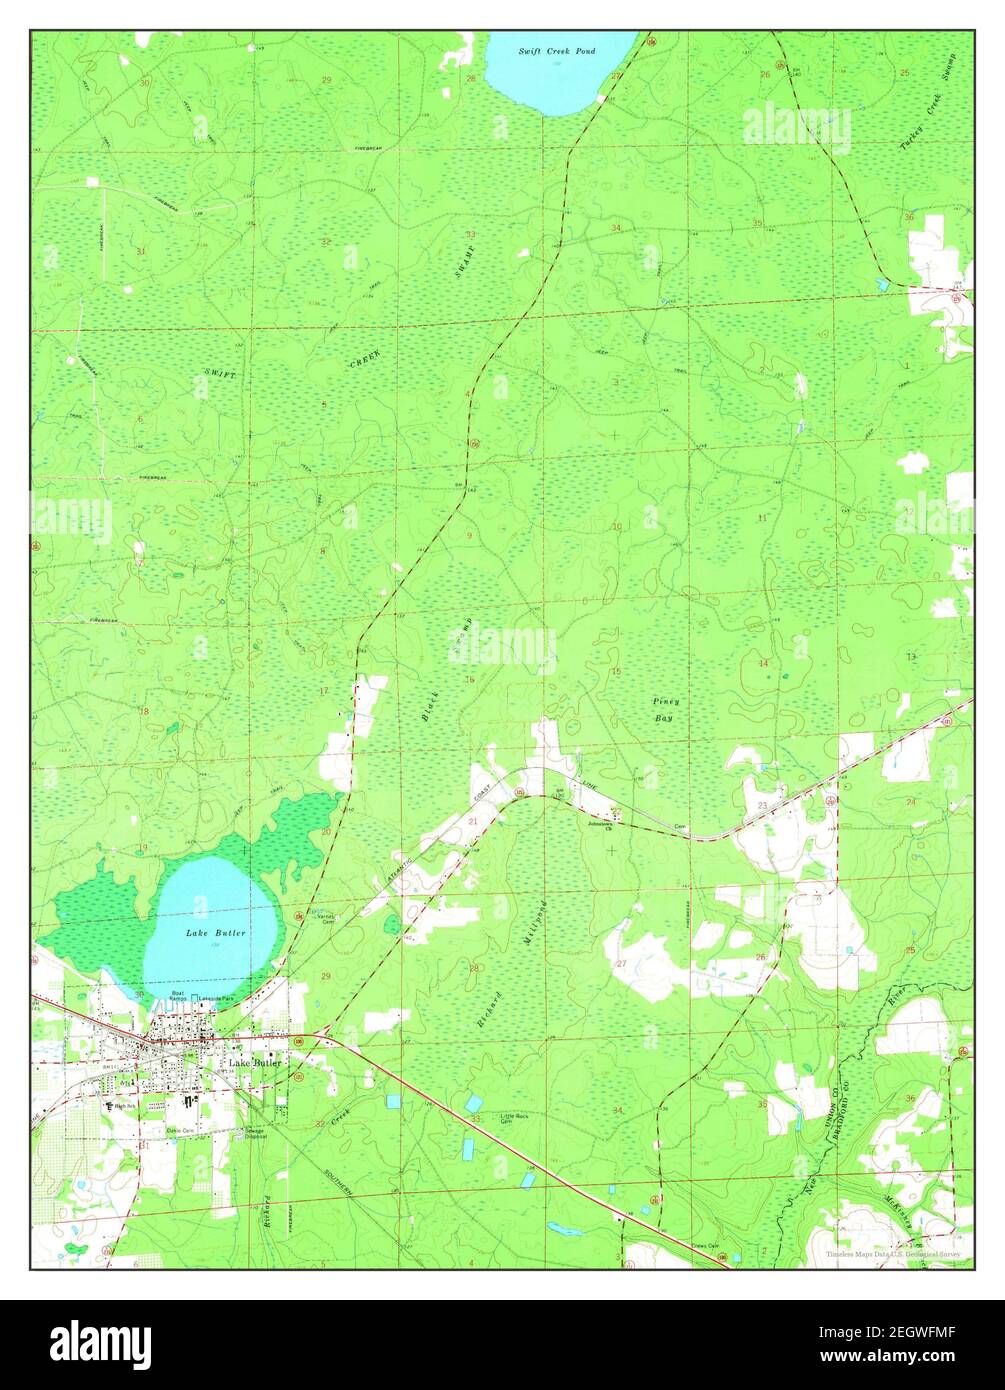 Lake Butler, Florida, map 1966, 1:24000, United States of America by Timeless Maps, data U.S. Geological Survey Stock Photo